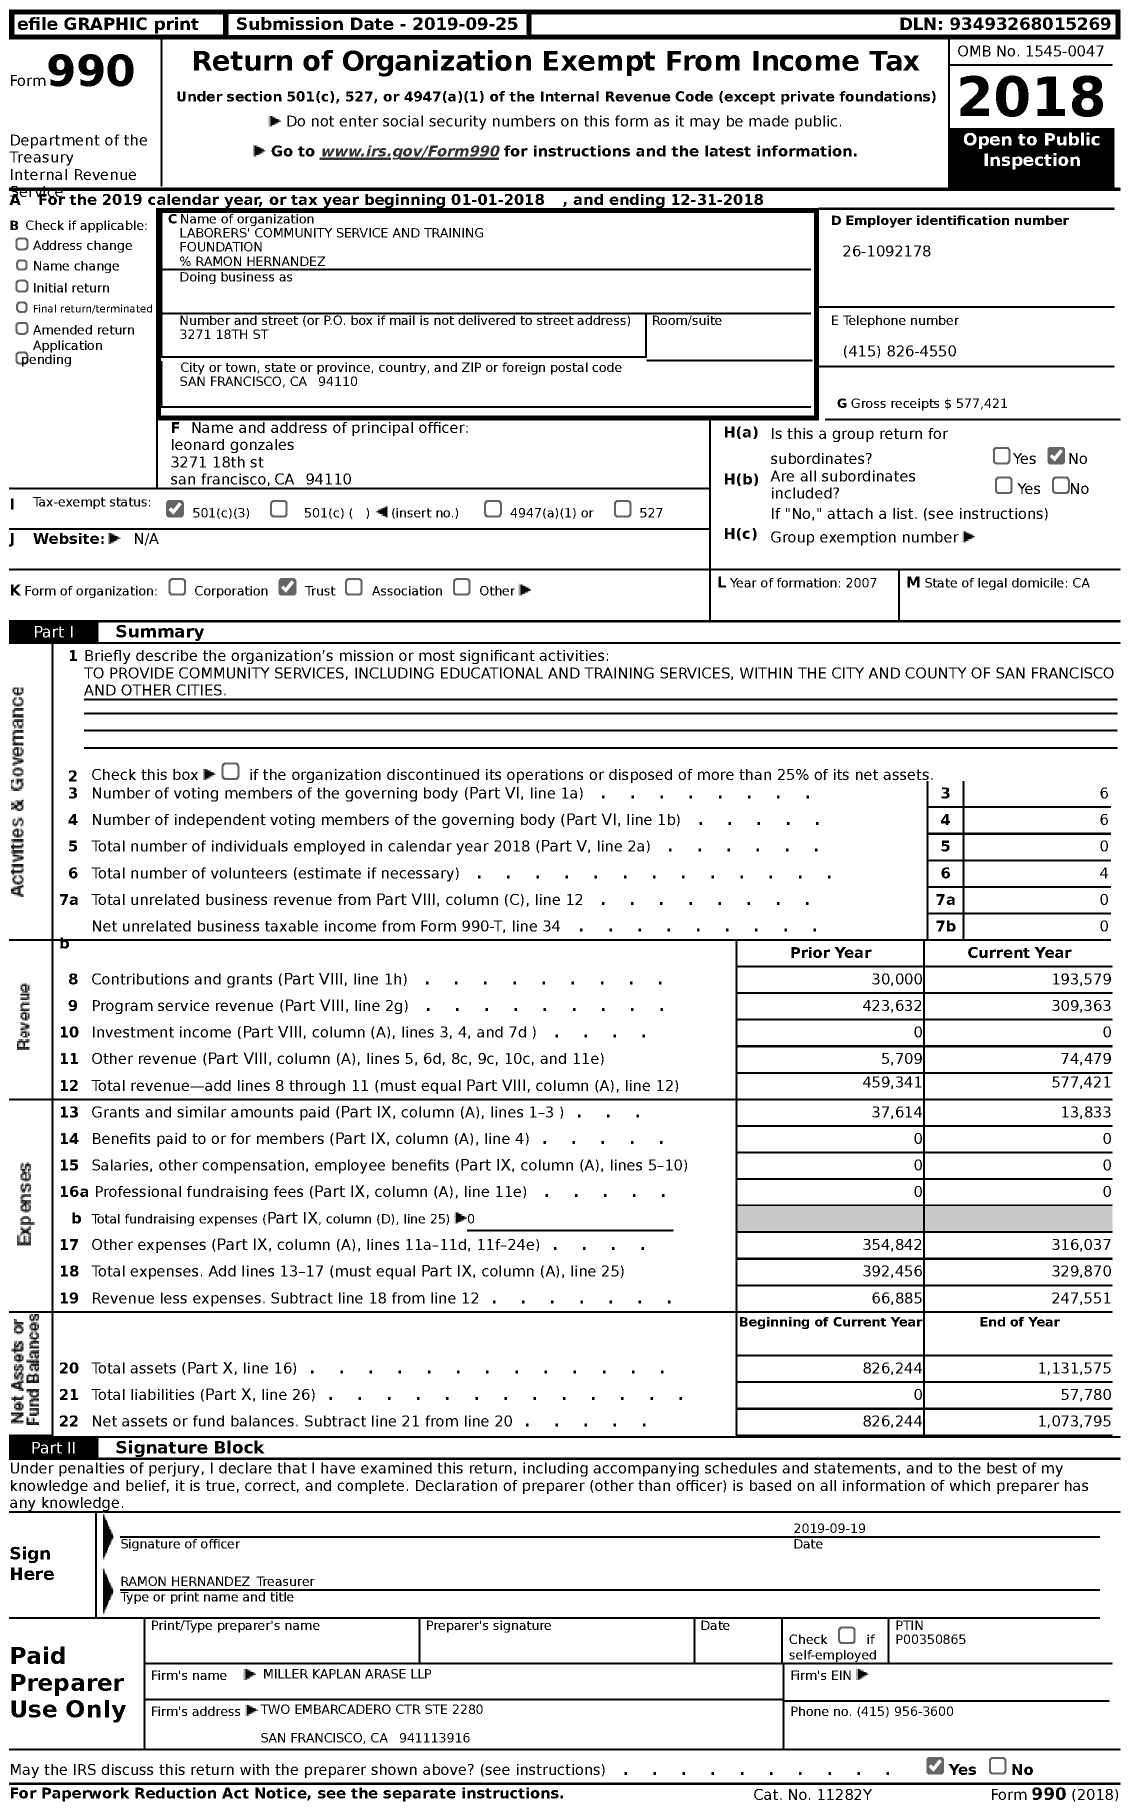 Image of first page of 2018 Form 990 for Laborers' Community Service and Training Foundation